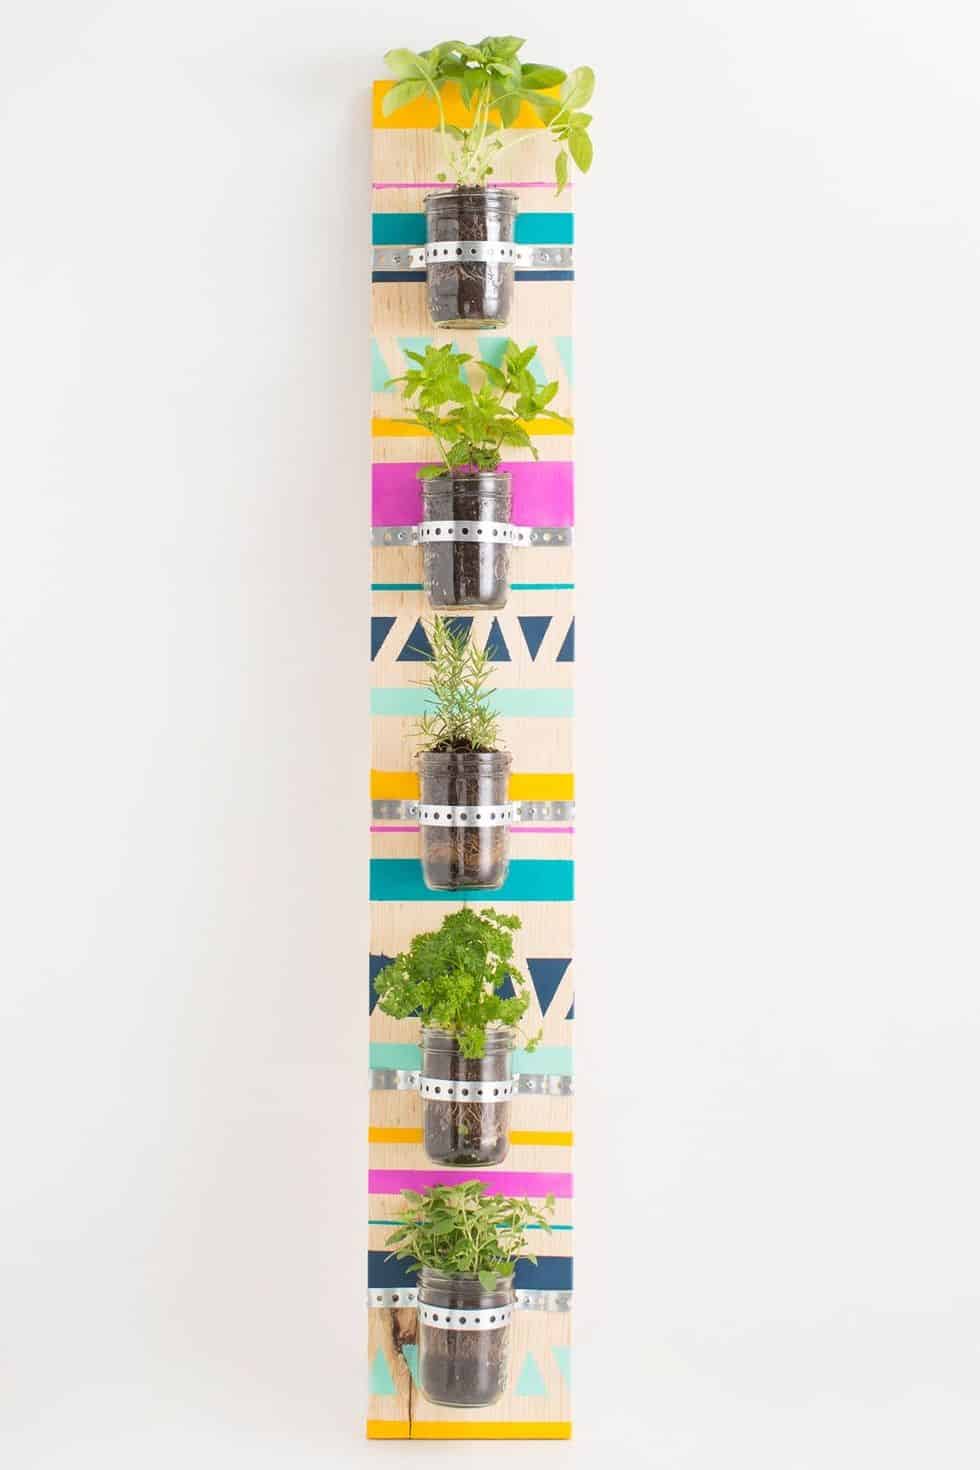 12 DIY Vertical Garden Projects for Spring